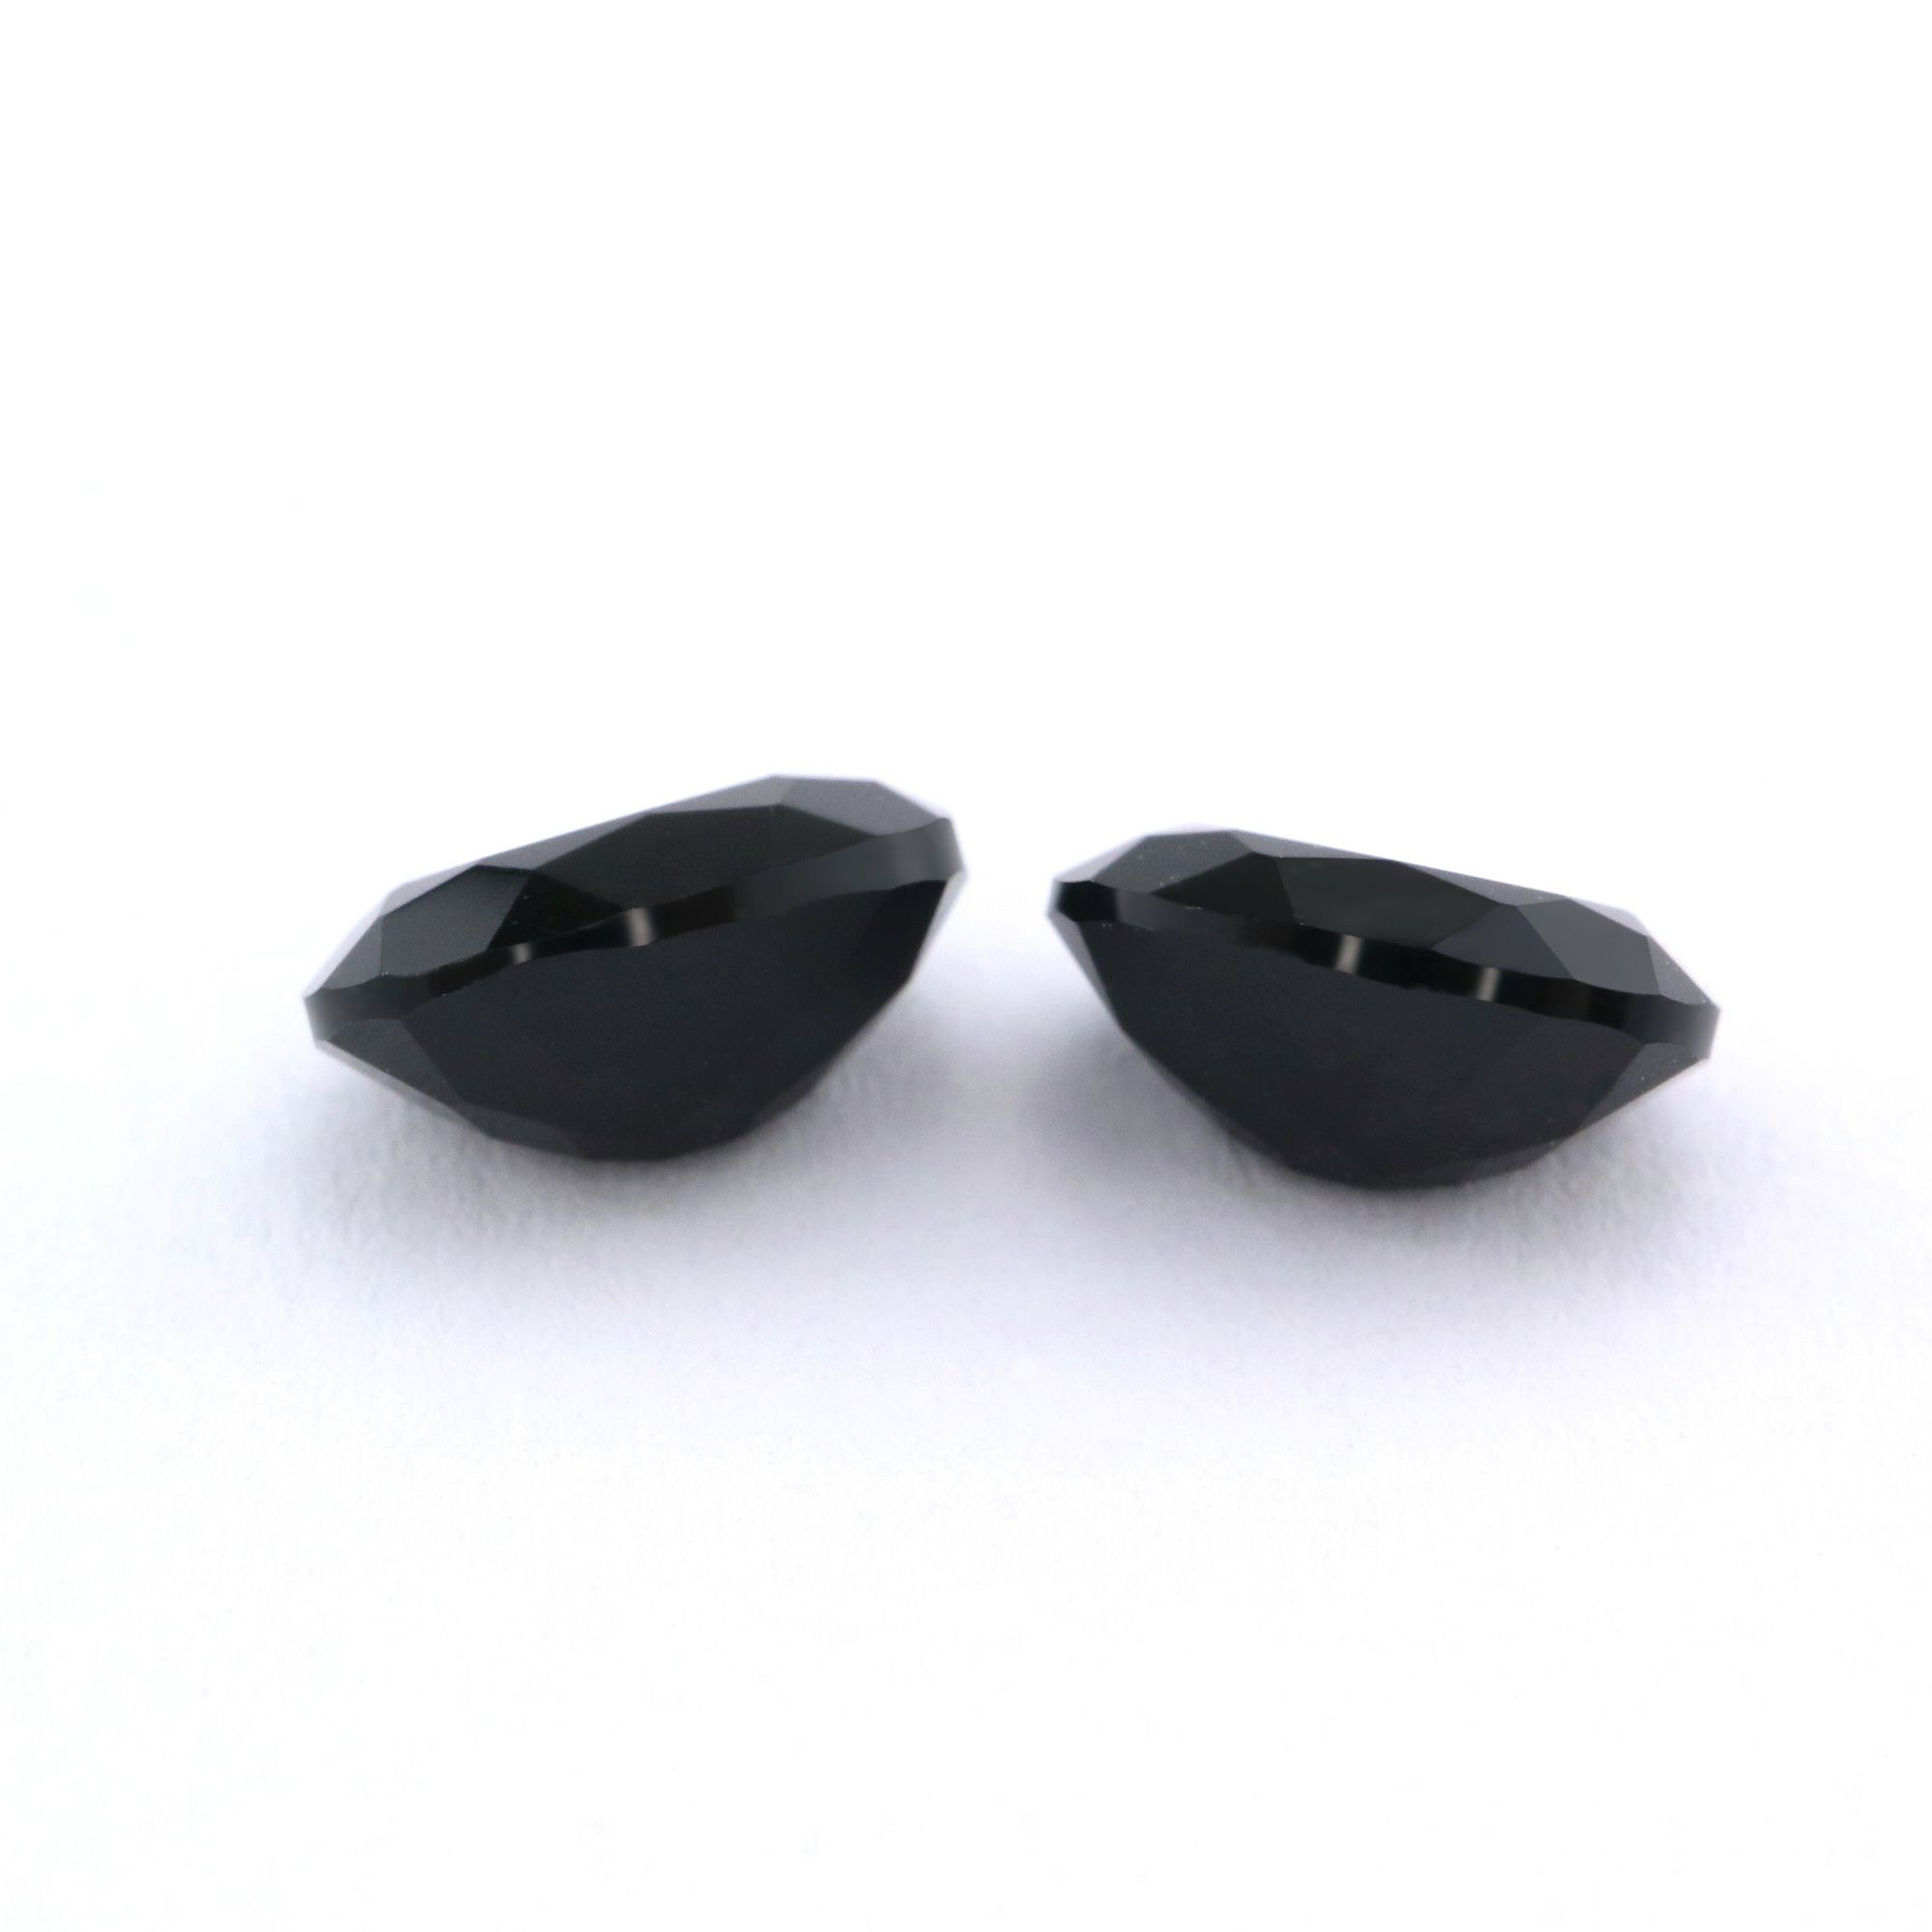 5Pcs Natural Oval Black Onyx Faceted Cut Loose Gemstone Nature Semi Precious Stone DIY Jewelry Supplies 4120129 - Click Image to Close